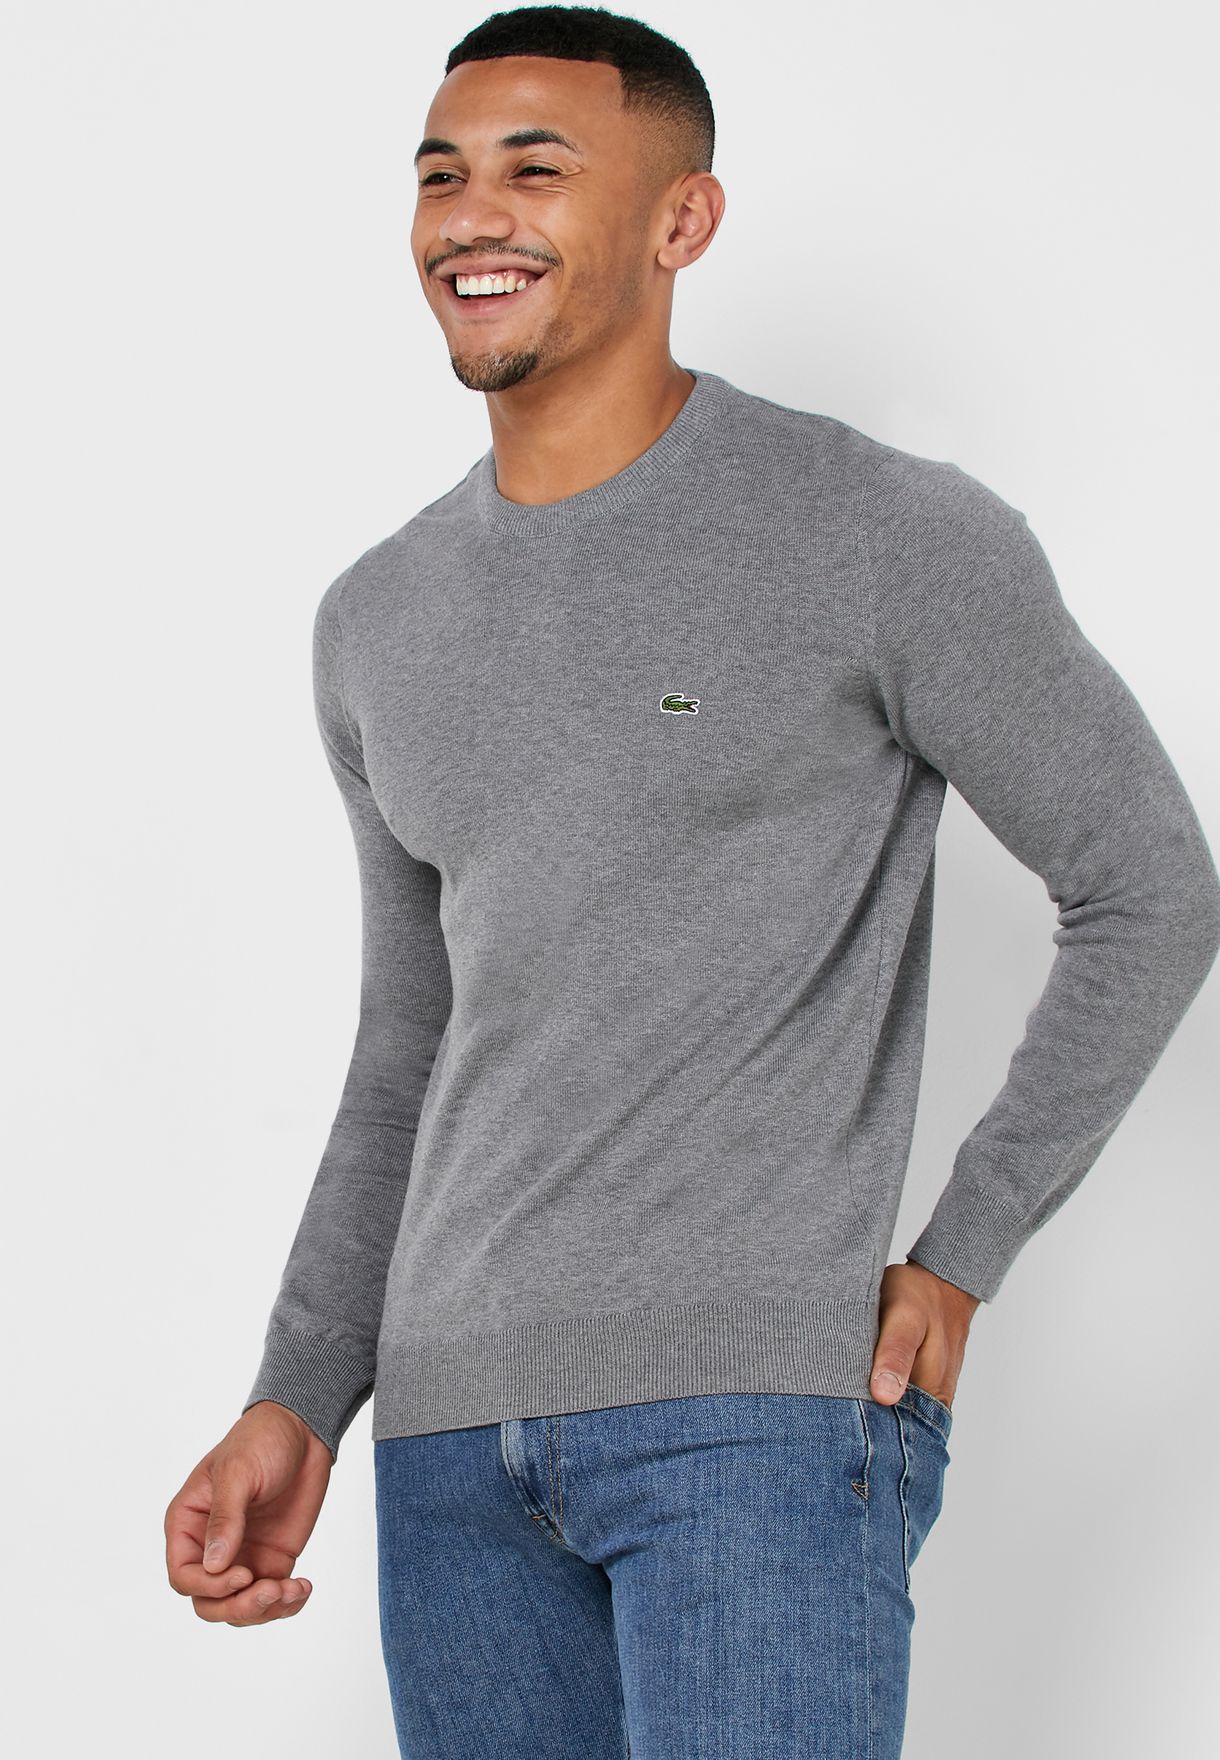 Buy Lacoste grey Croc Logo Sweater for 